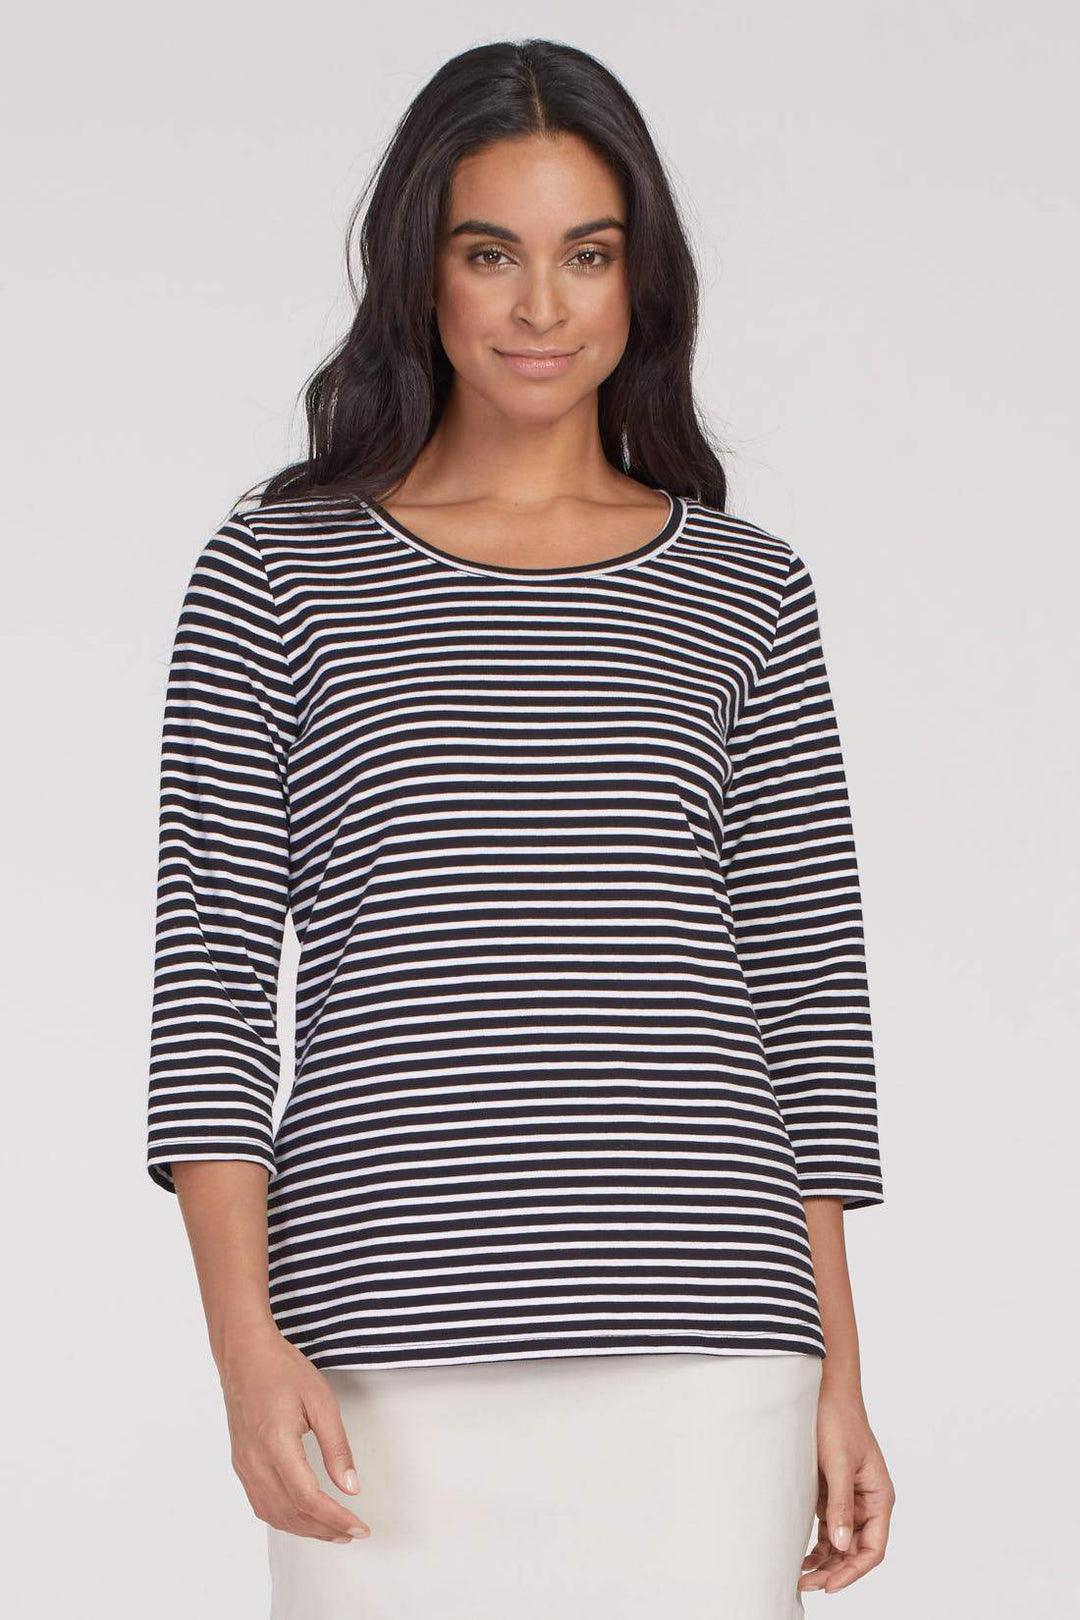 Stripe Knit Top With Criss Cross Back